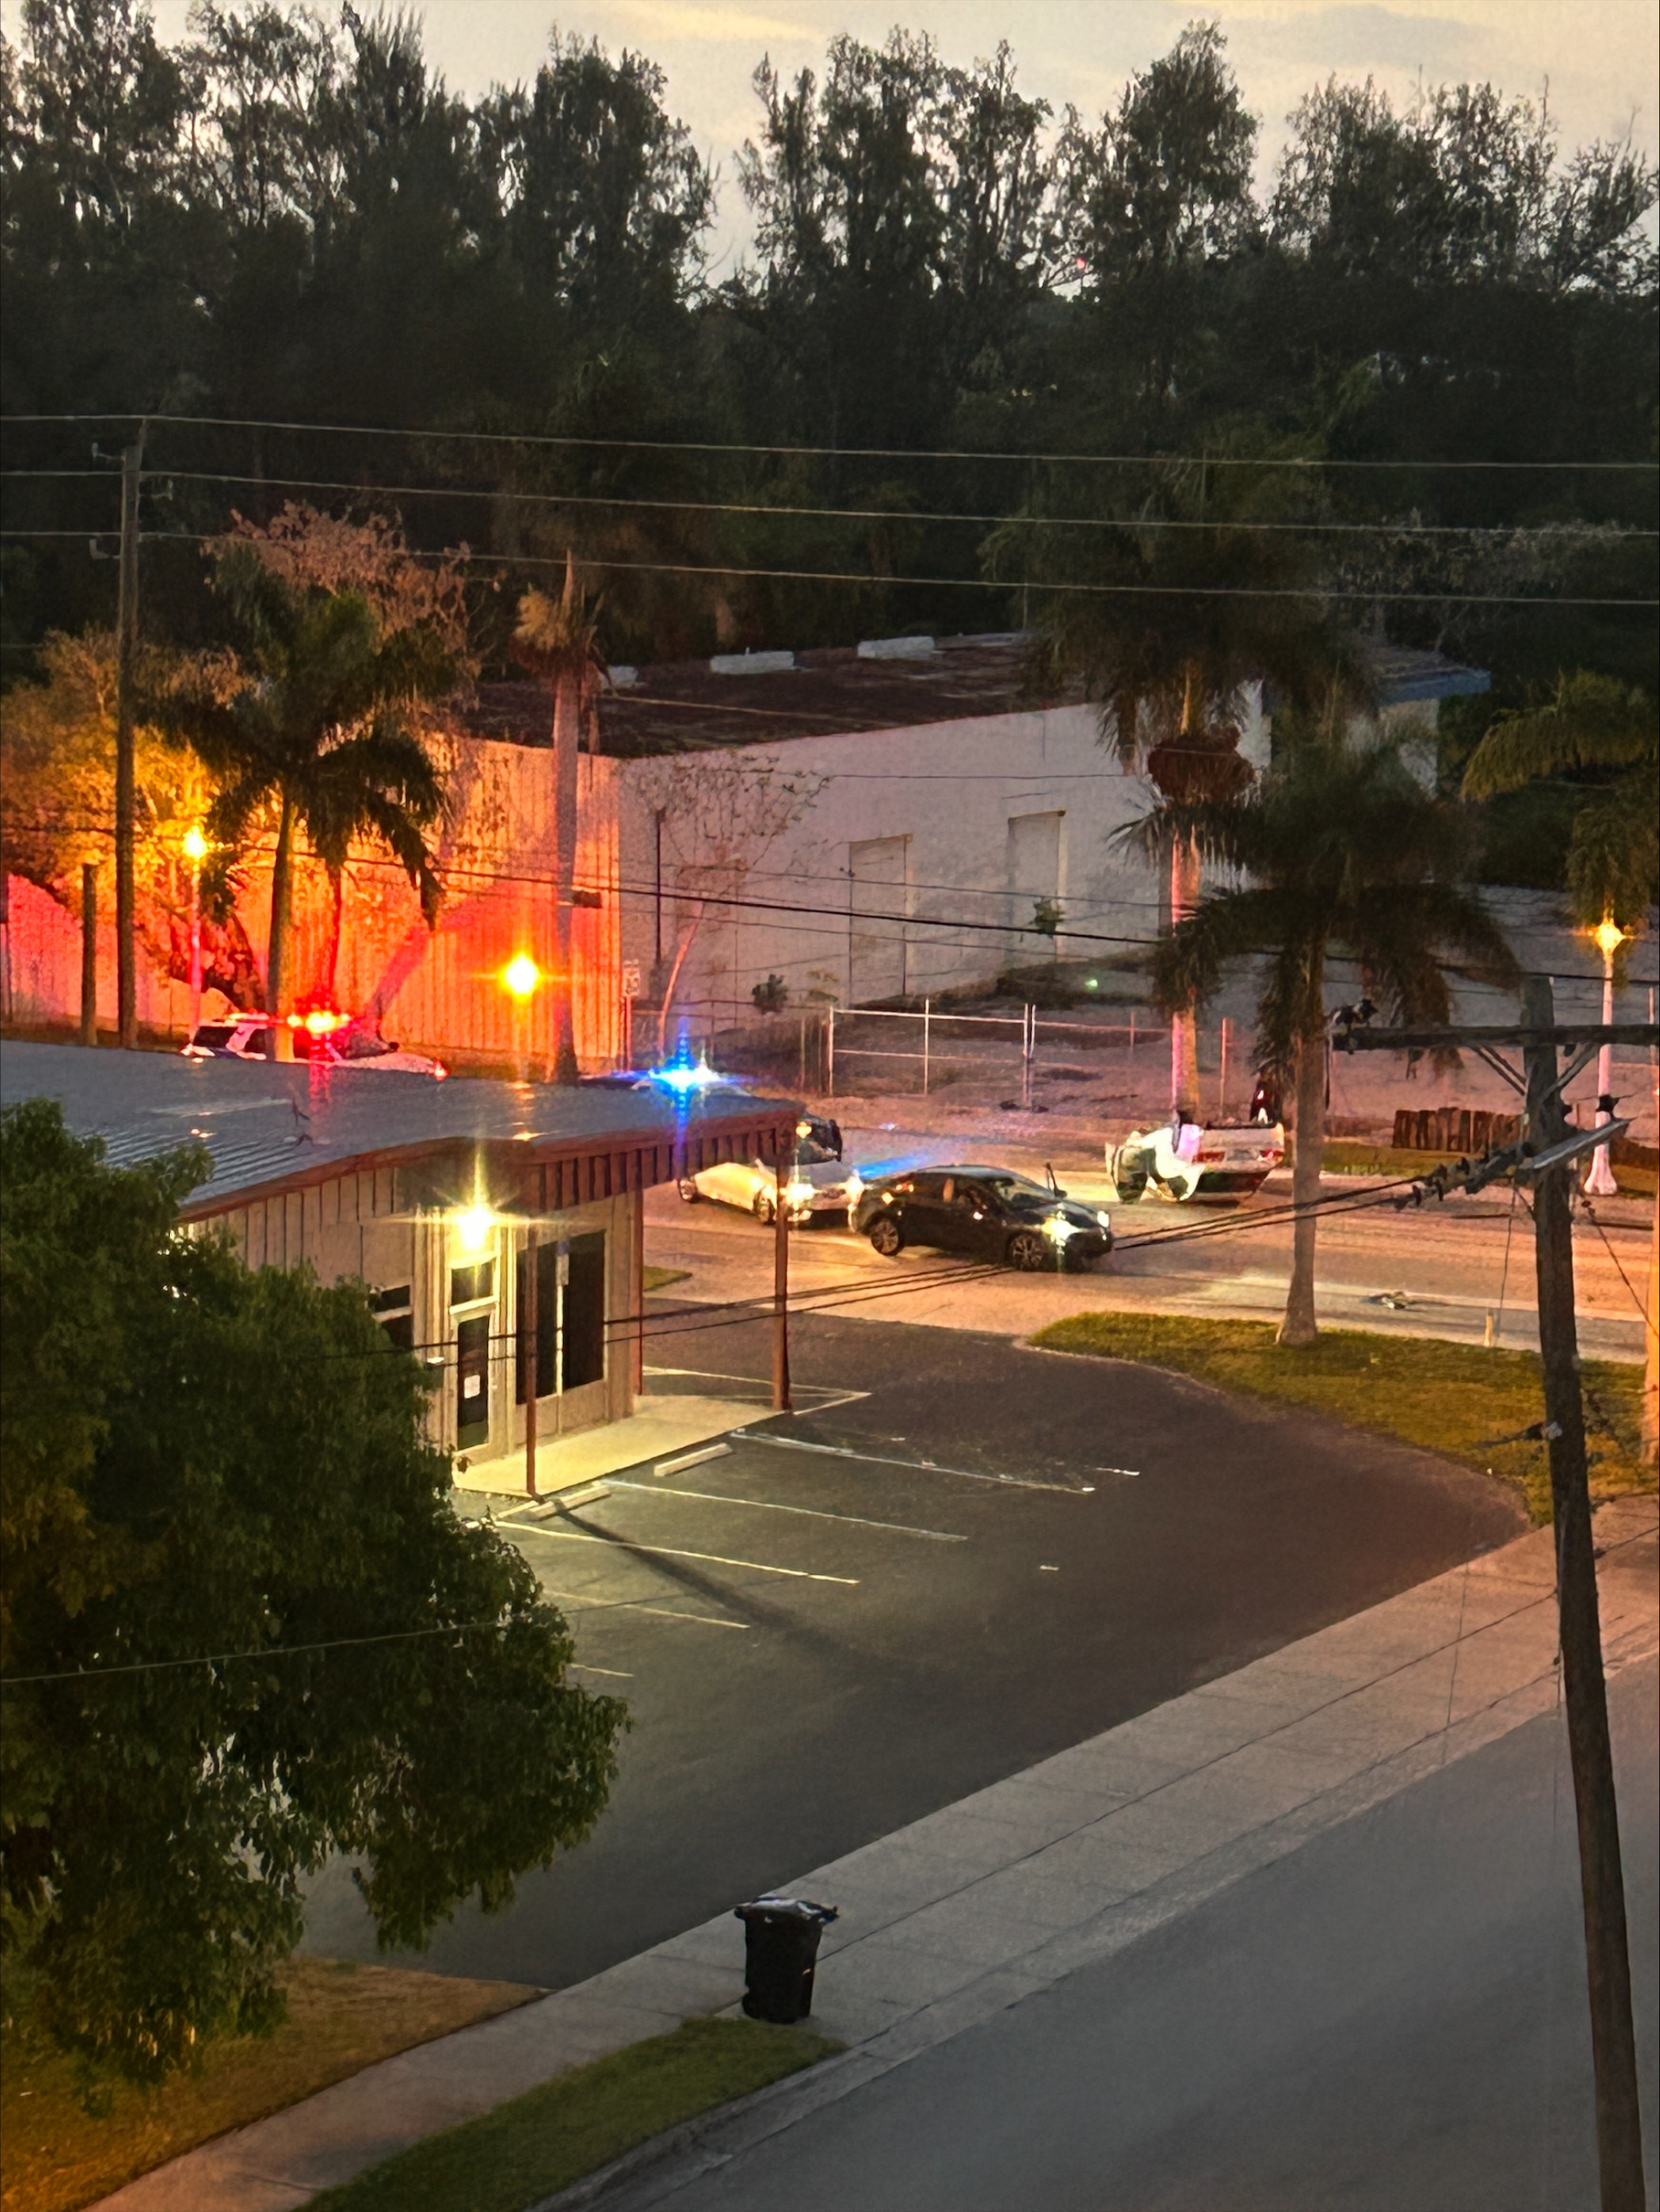 Car flips sending one person to the hospital – Wink News